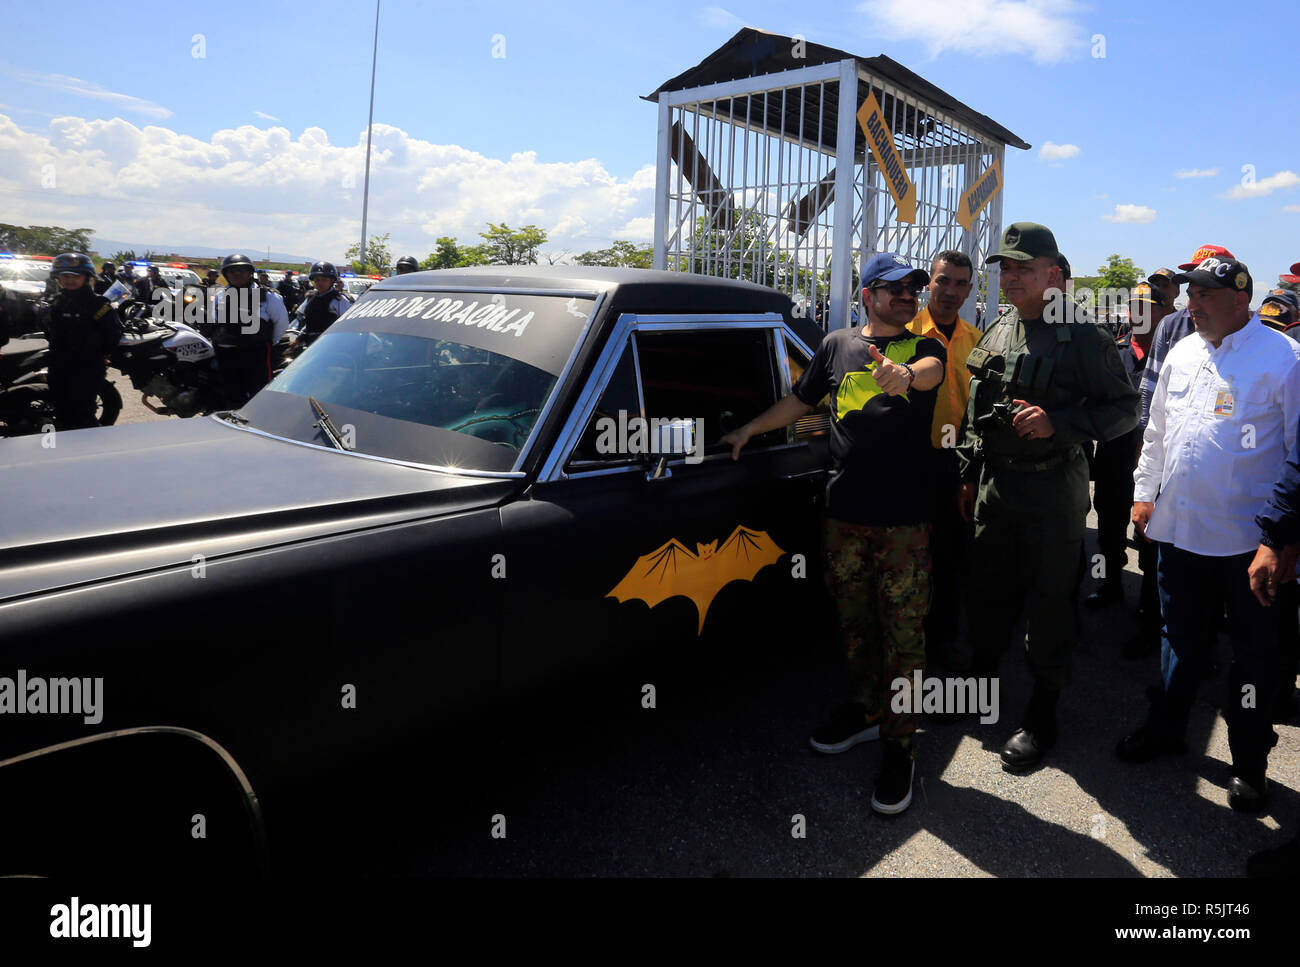 Valencia, Carabobo, Venezuela. 1st Dec, 2018. December 01, 2018. Rafael Lacava (l) governor of Carabobo state, poses next to Dracula's car, accompanied by Juan Carlos Dubolay (c) General (EJ) commander of the Zodi, Comprehensive Defense Zone (for its acronym in Spanish) during the start-up of the security operation Safe Christmas, in Valencia, Carabobo state. Photo: Juan Carlos Hernandez Credit: Juan Carlos Hernandez/ZUMA Wire/Alamy Live News Stock Photo